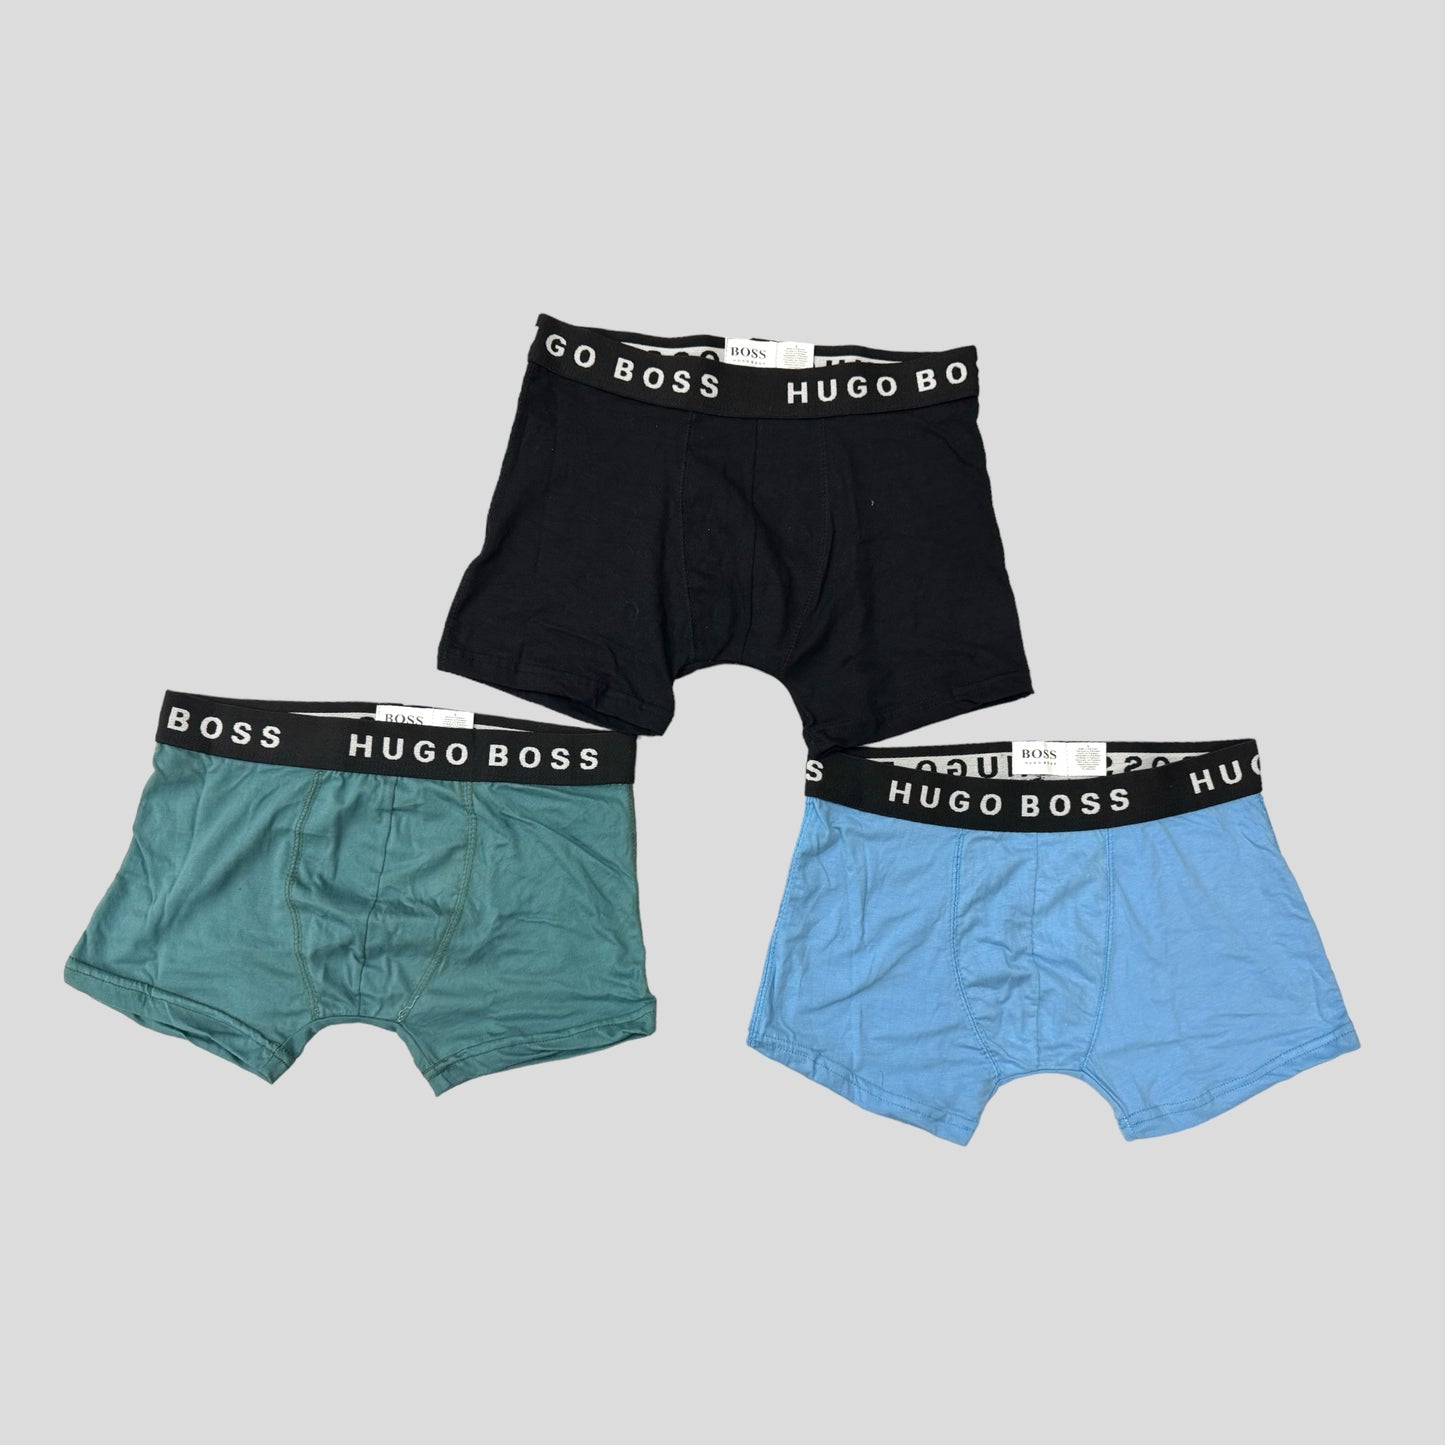 B-O-S-S Small Multi Color Boxers (Pack of 3)